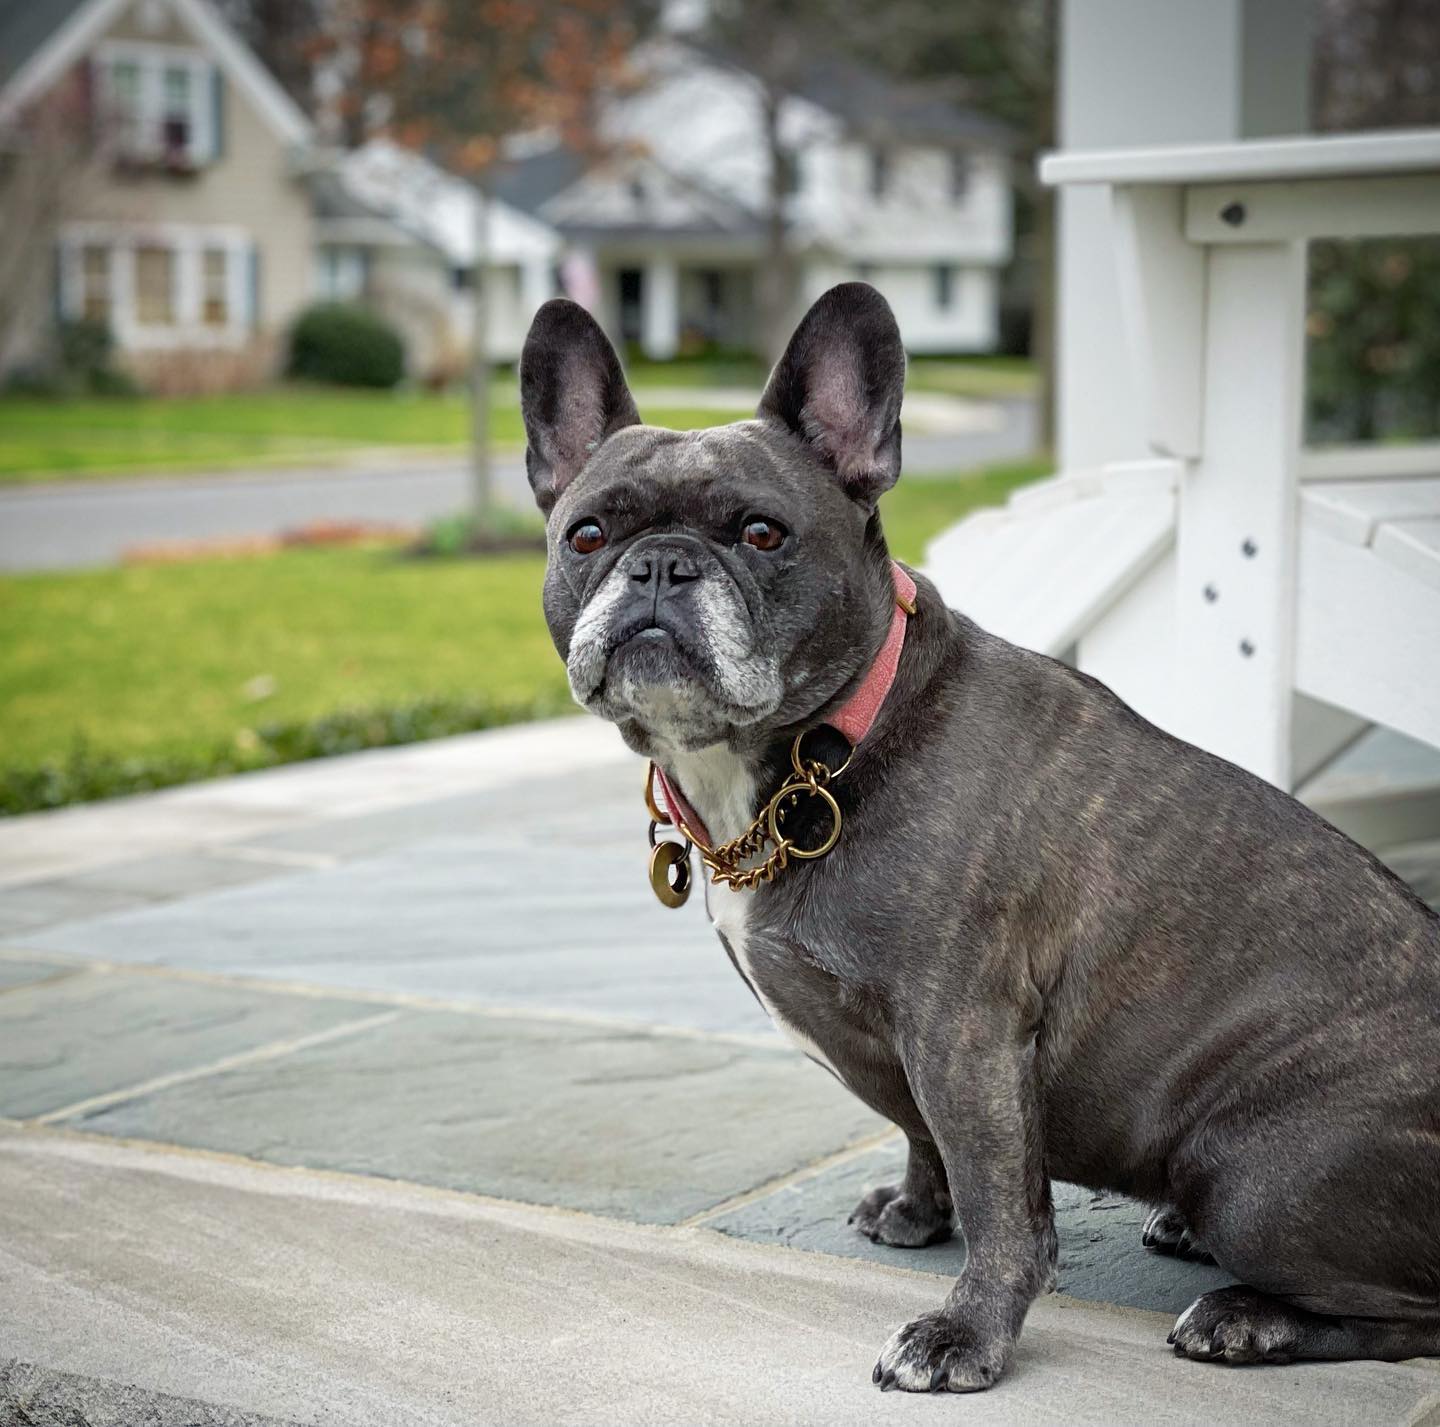 Photo by Darcy The French Bulldog in Fair Haven, New Jersey.